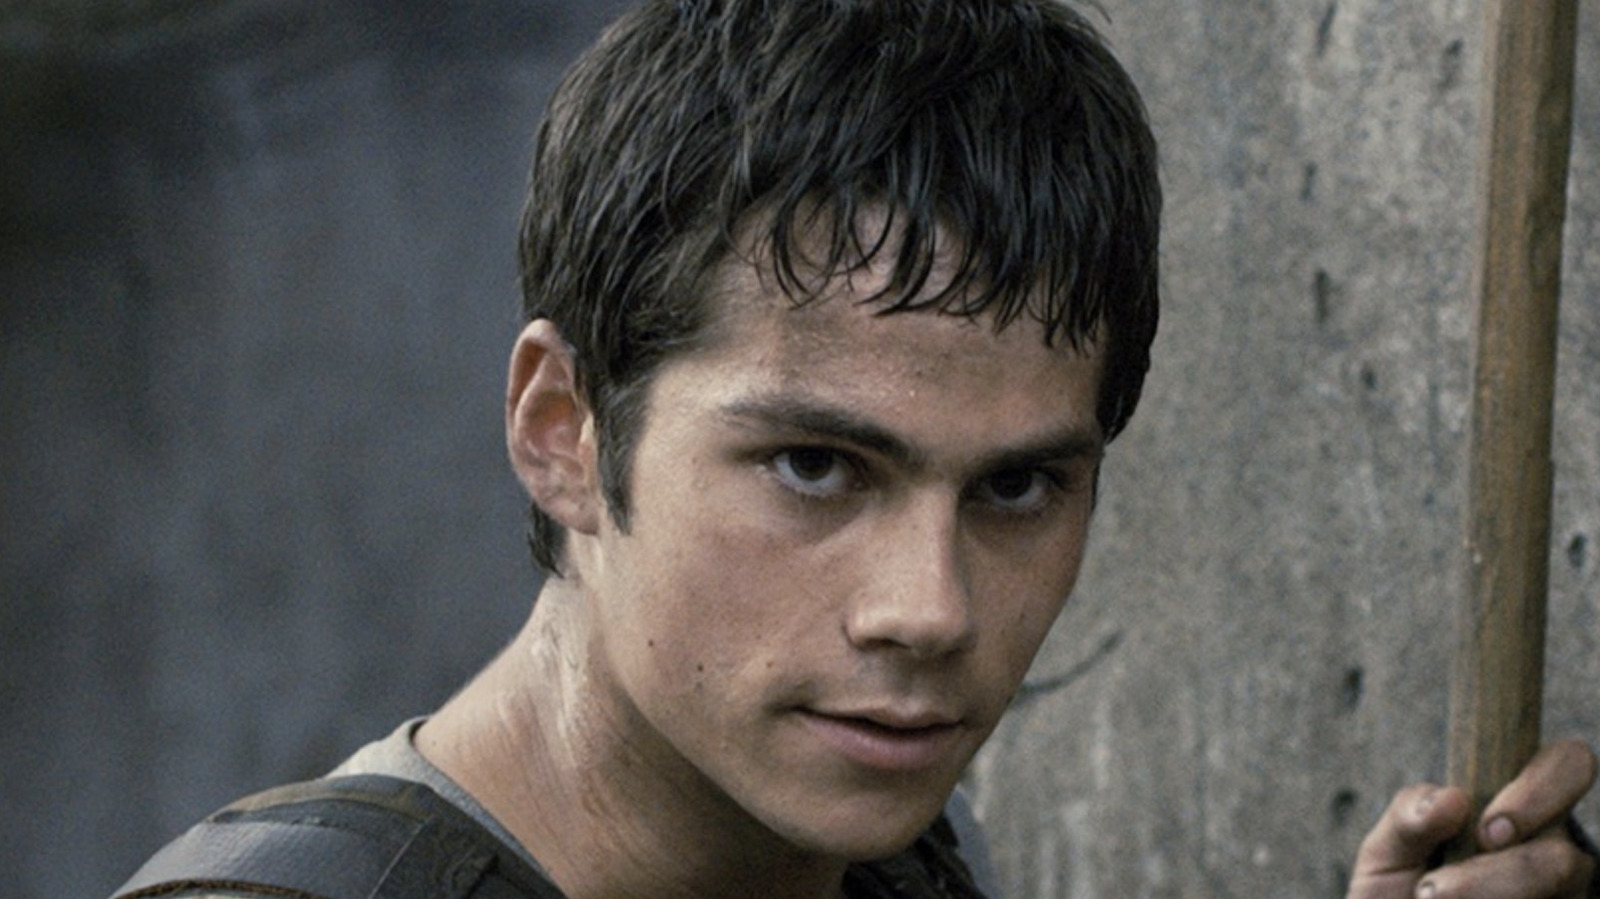 35 Best Movies Like Maze Runner You Should Watch in 2022